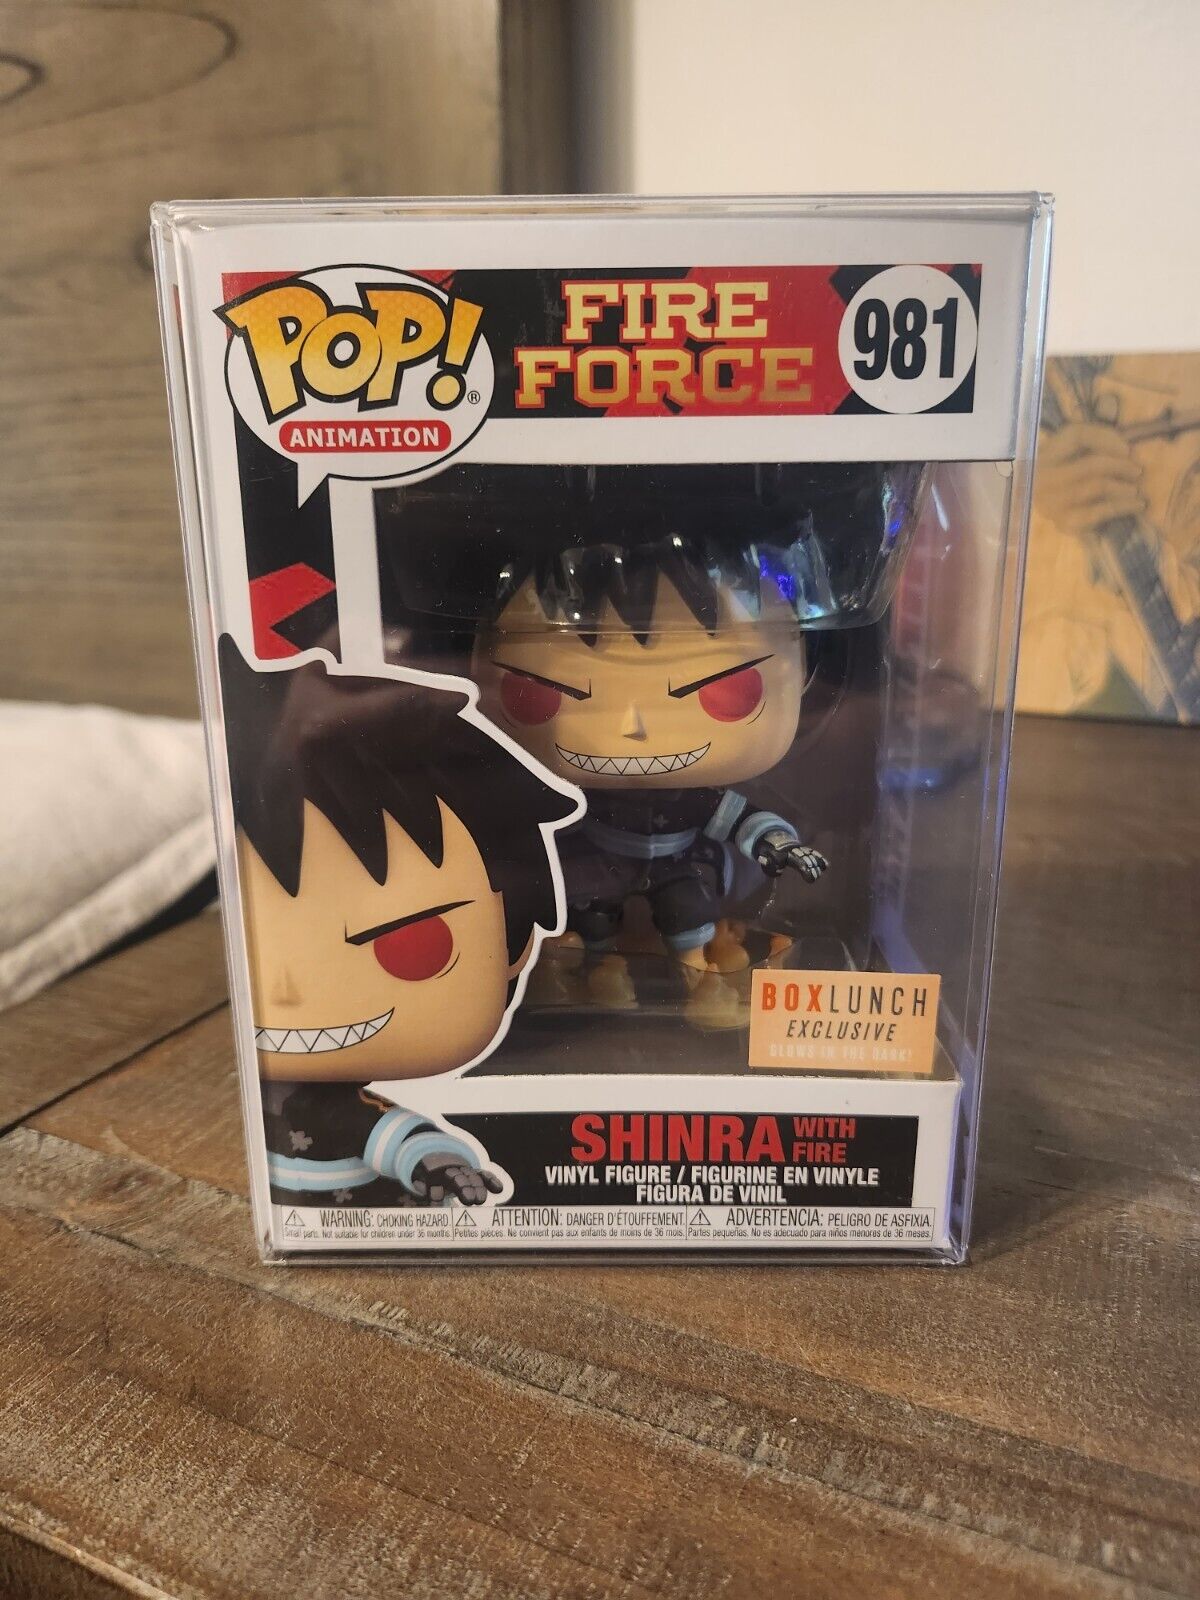 Fire Force - Shinra with Fire #981 Box Lunch Exclusive. Comes with protector.